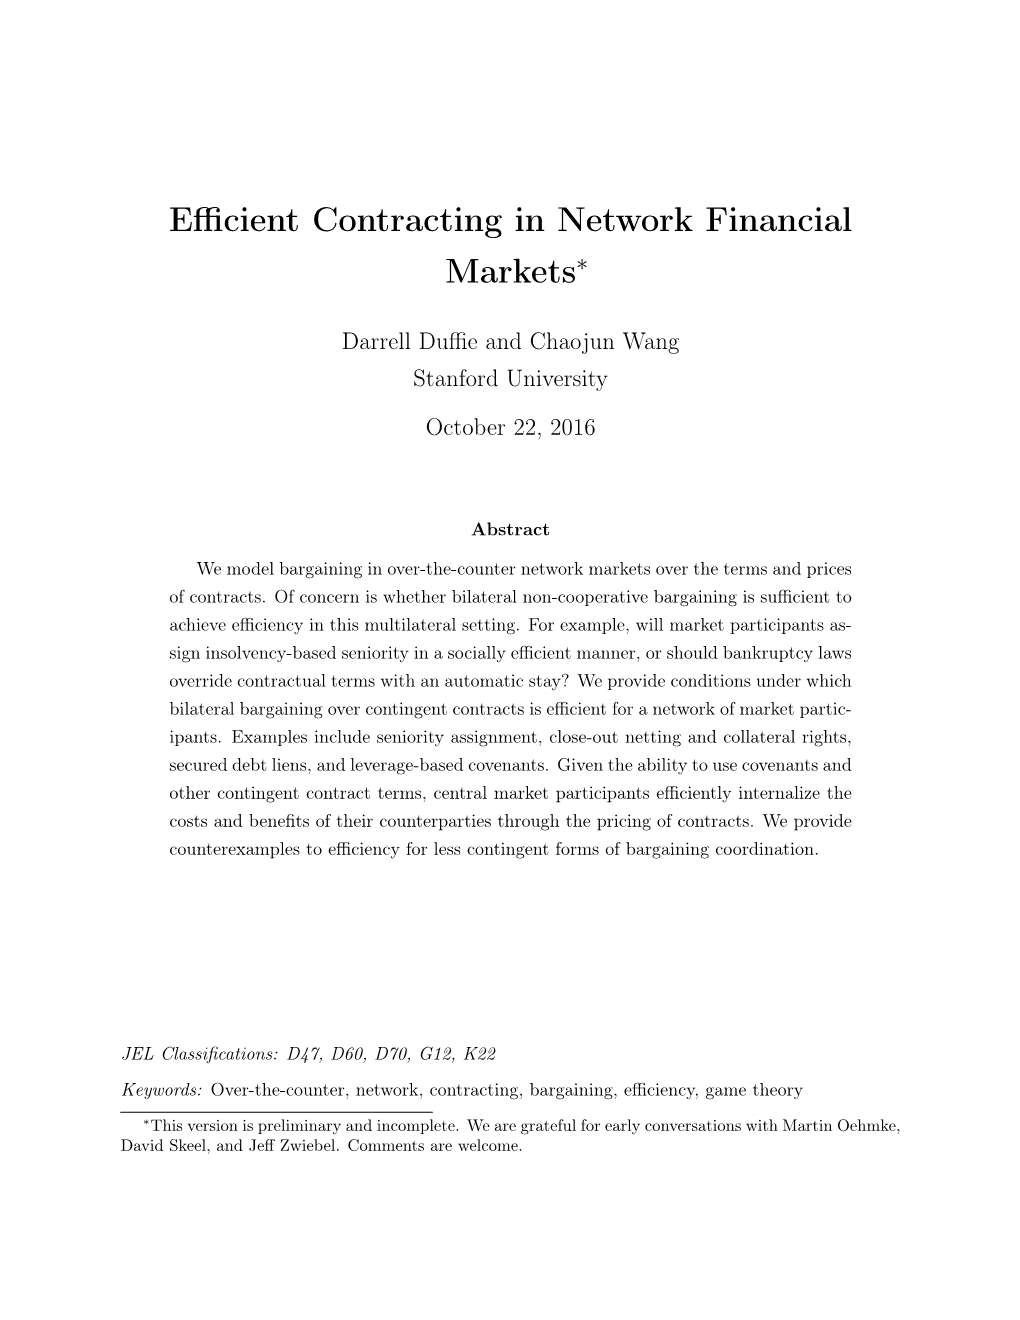 Efficient Contracting in Network Financial Markets